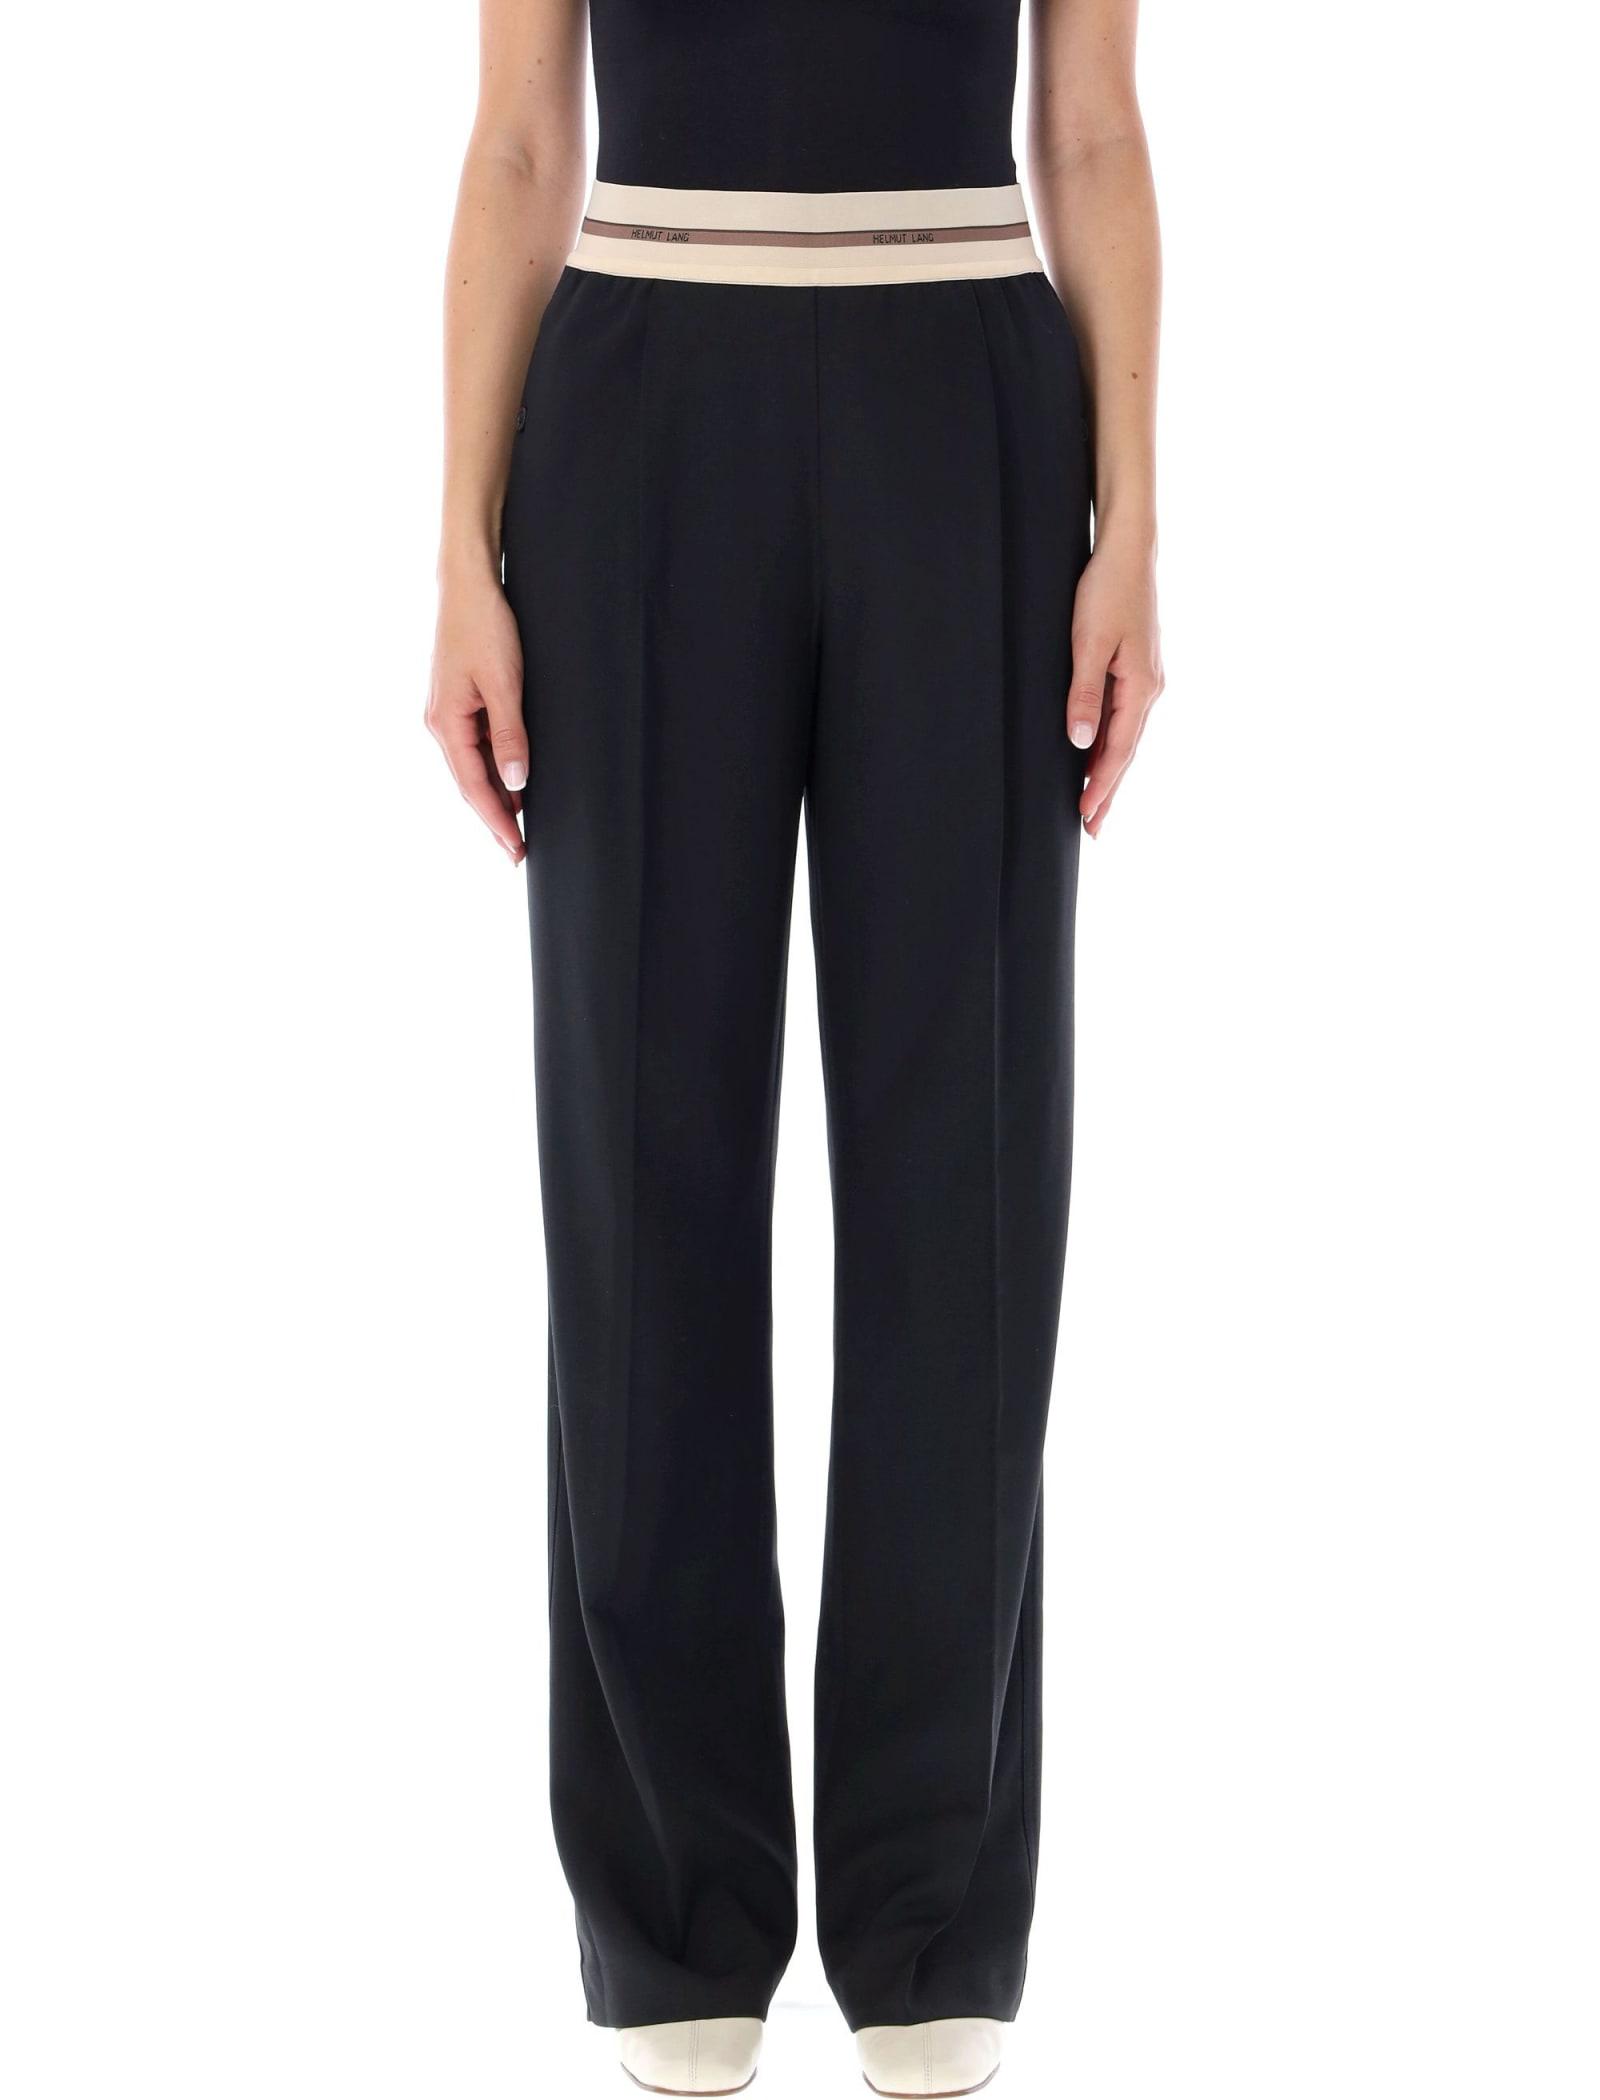 Helmut Lang Logo Band Pull-on Pants in Black | Lyst